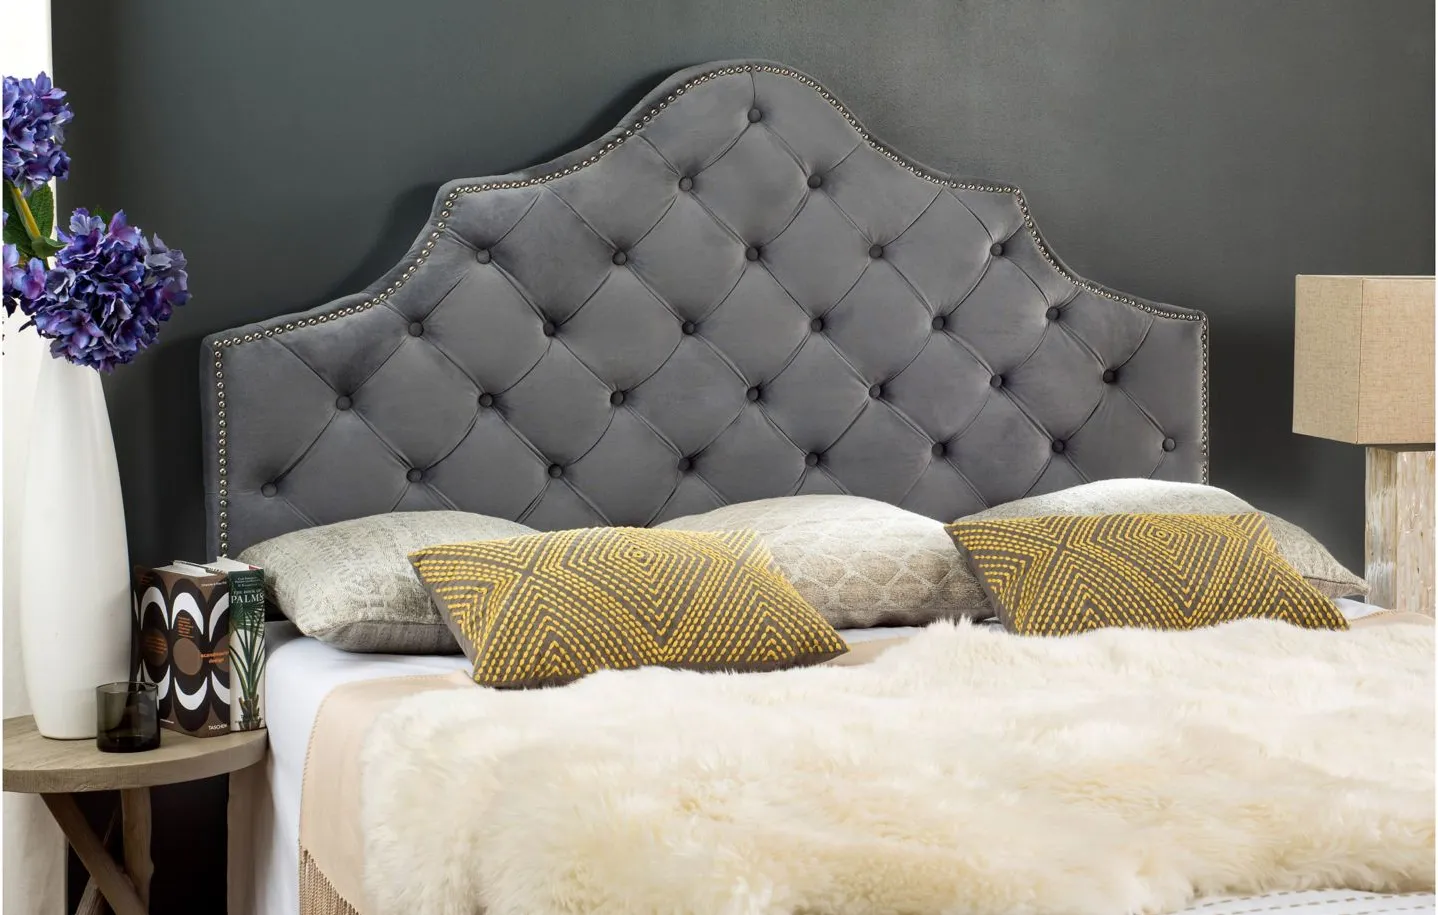 Arebelle Upholstered Headboard in Pewter by Safavieh